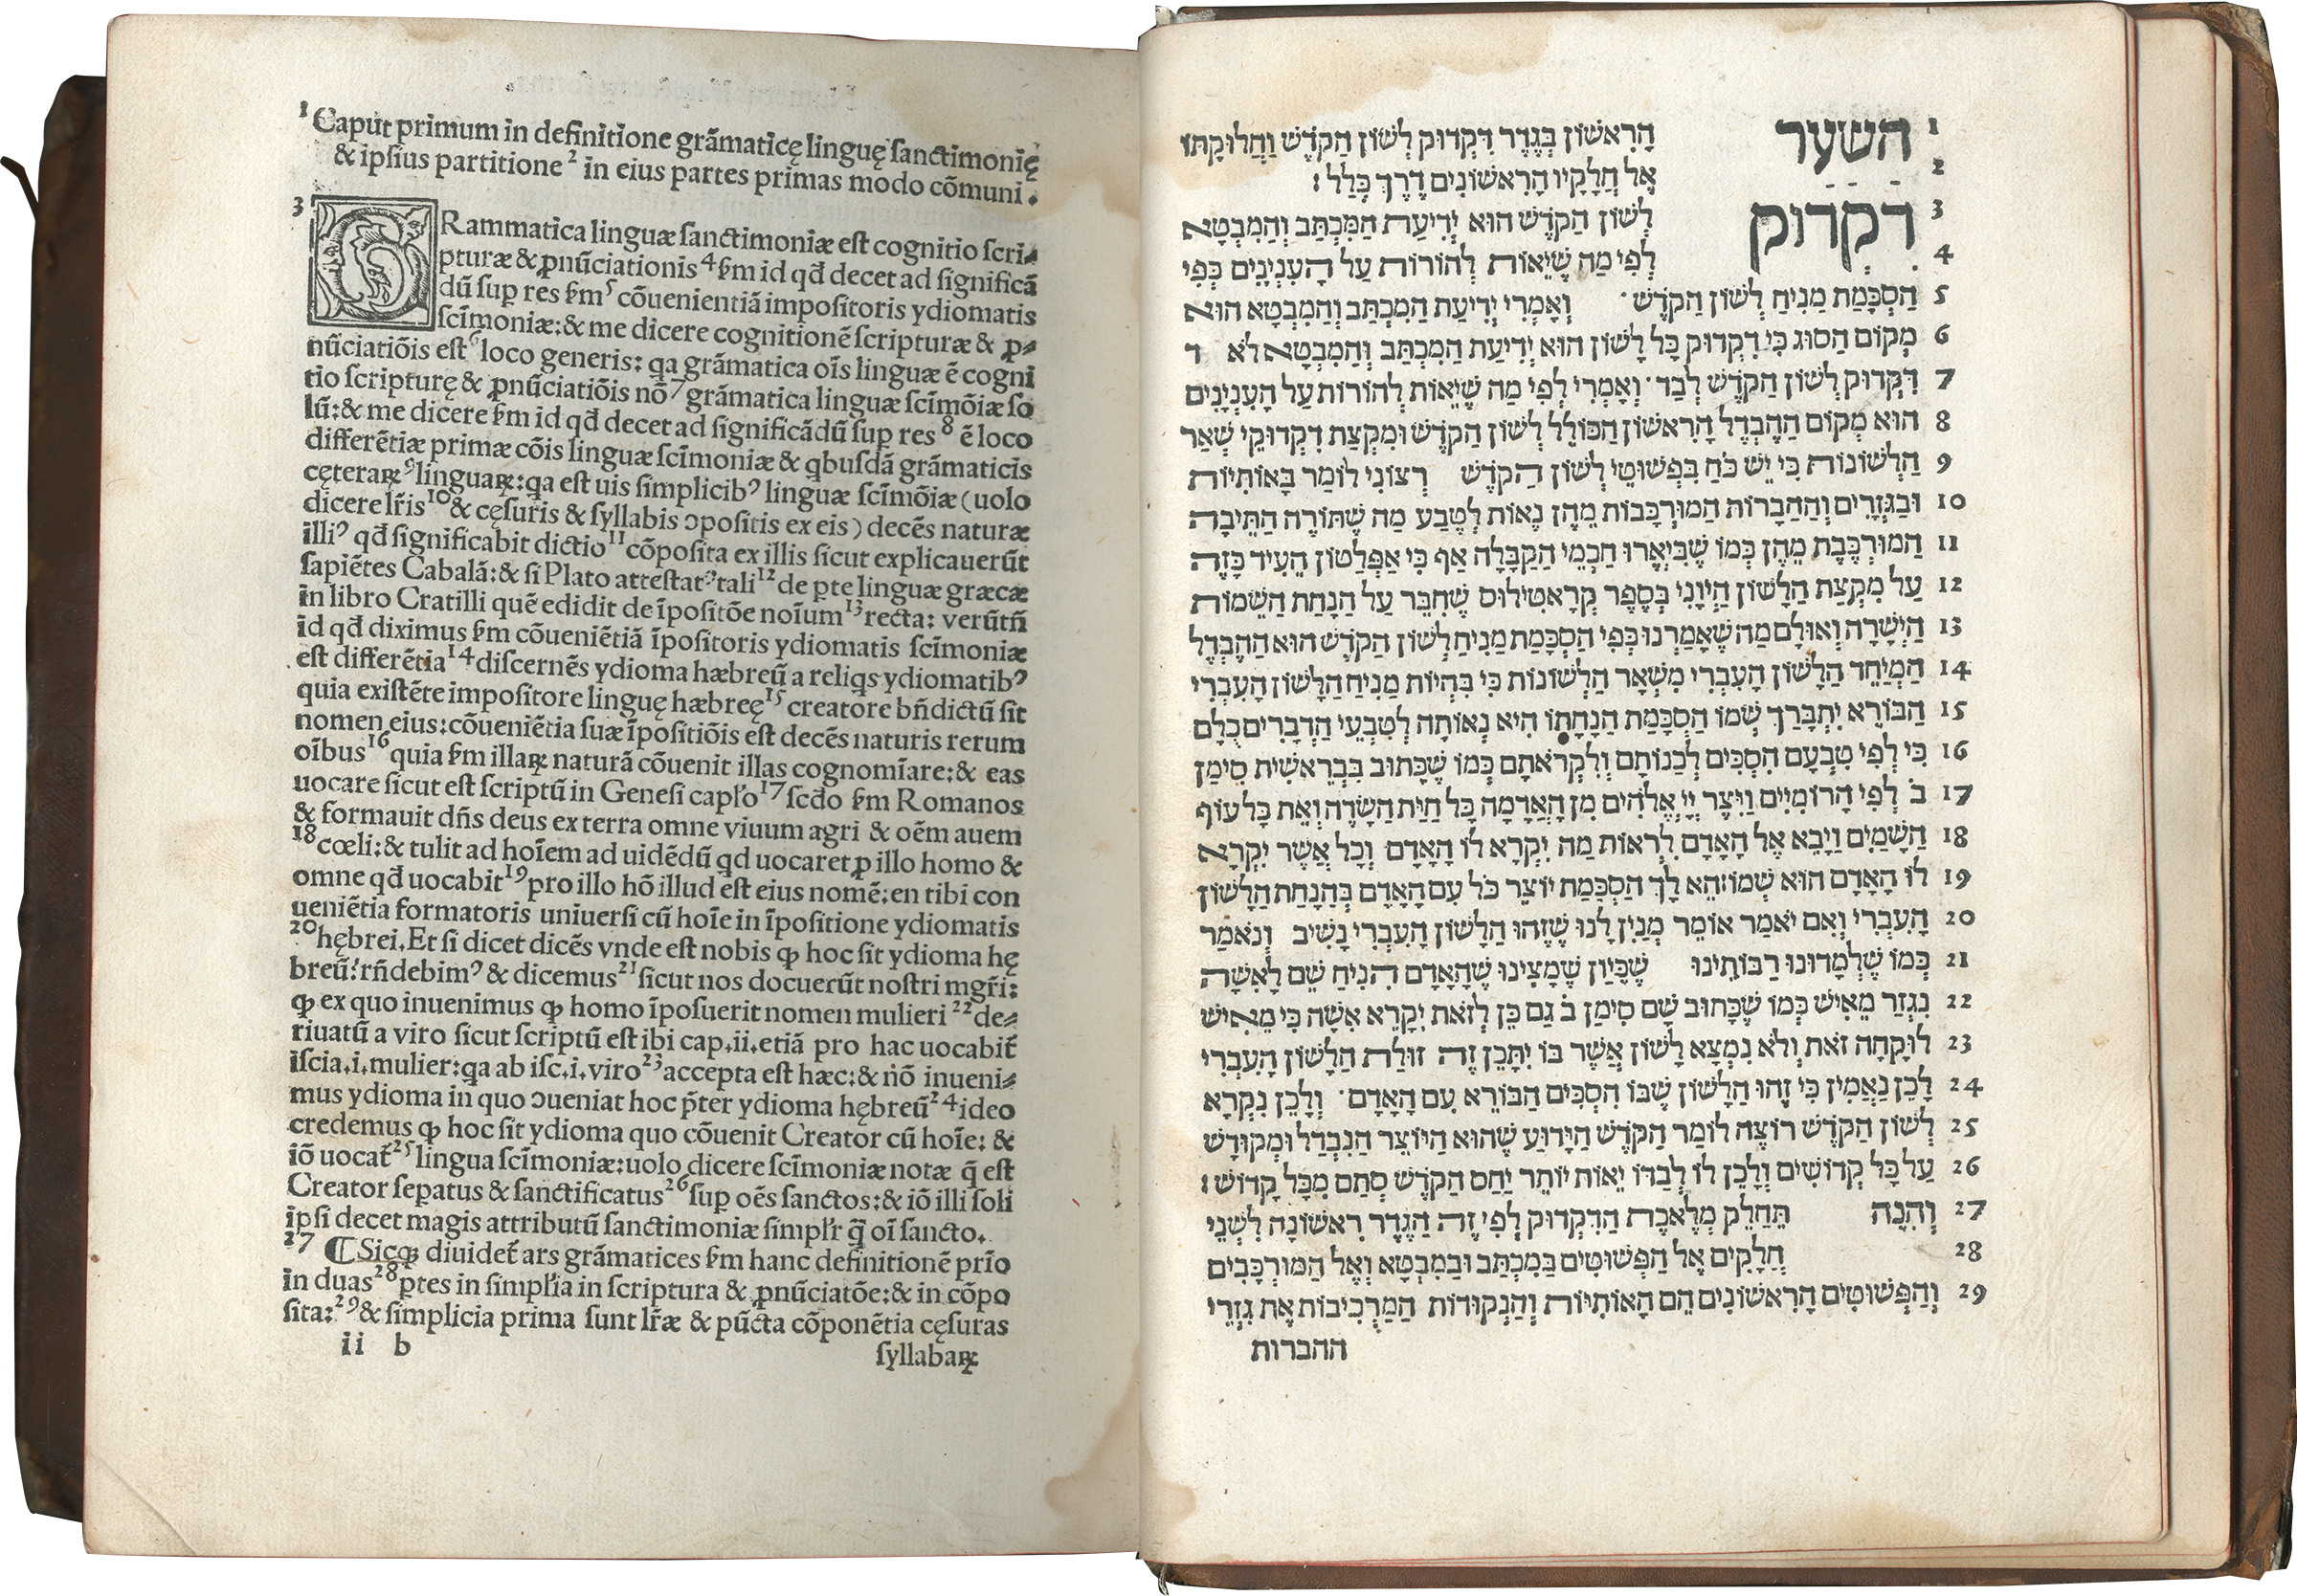 Printer's note, in Latin and Hebrew